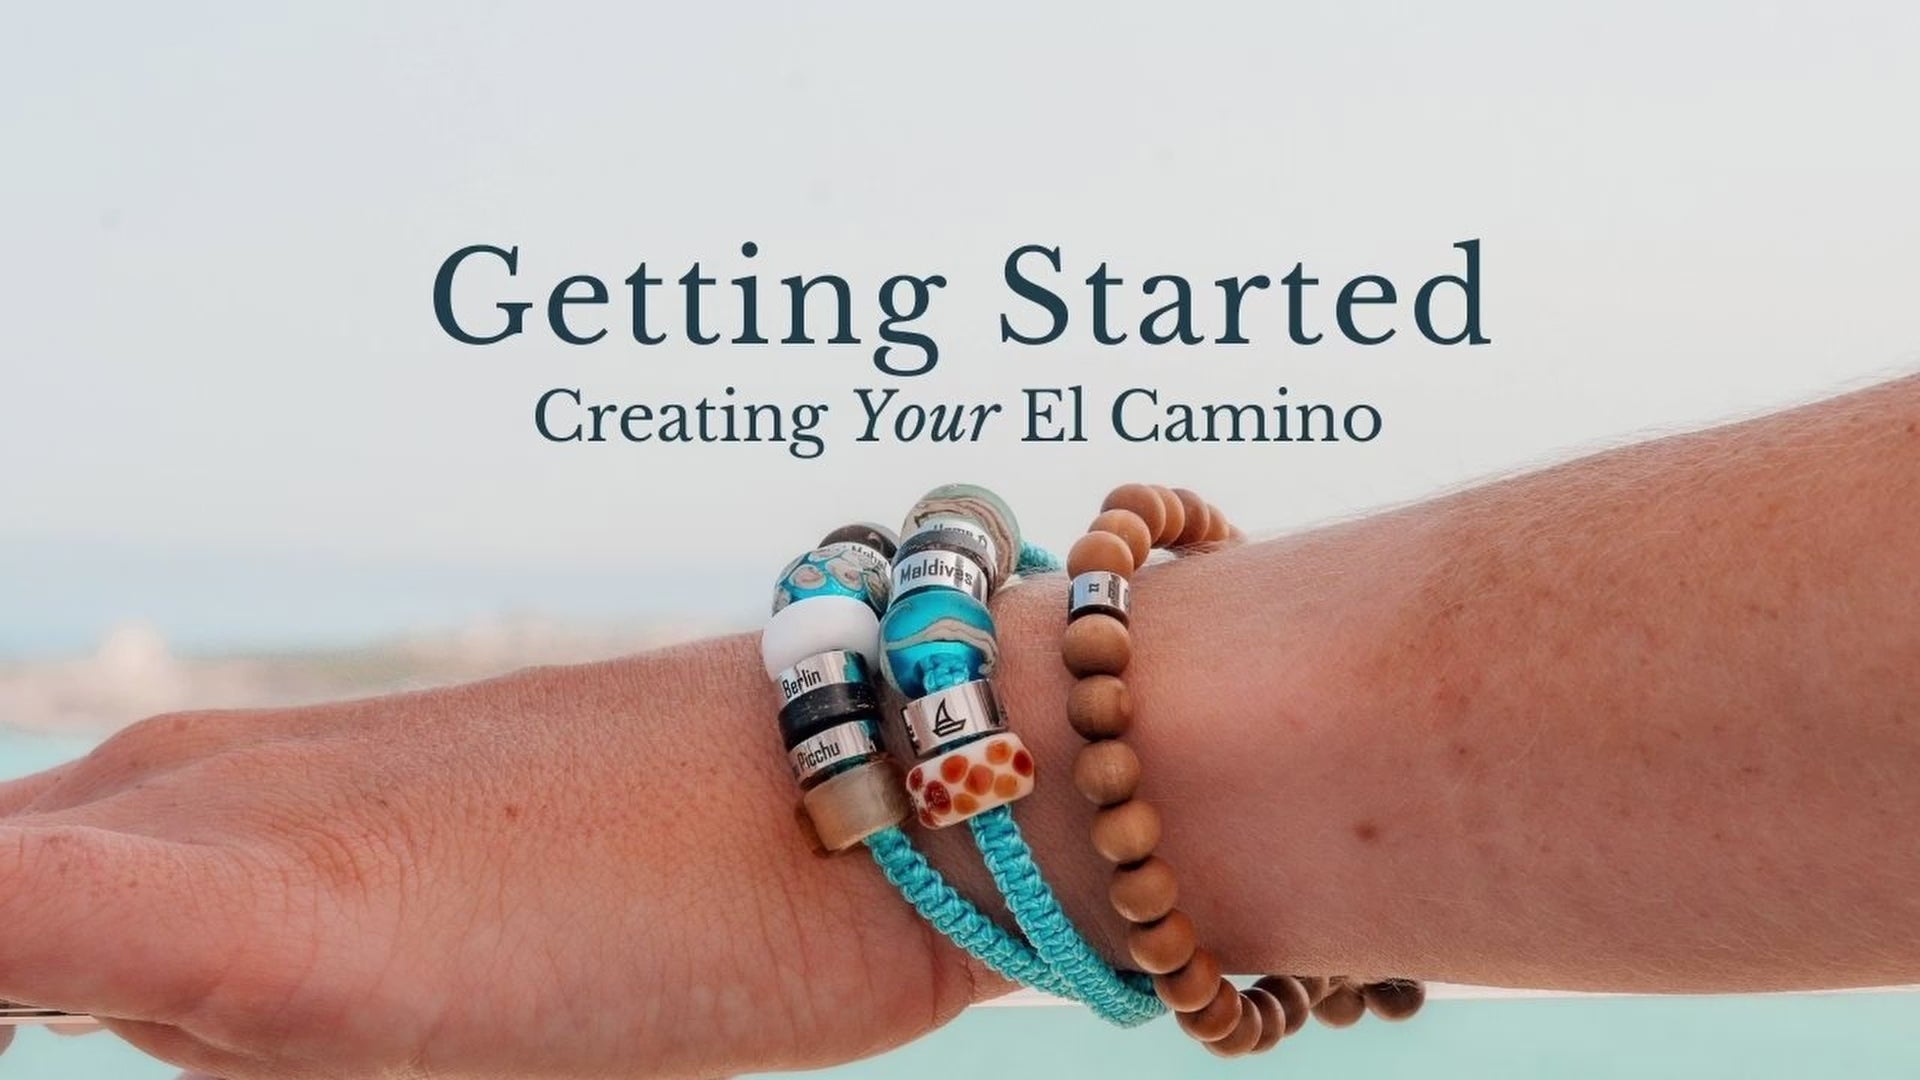 Load video: Getting Started with El Camino